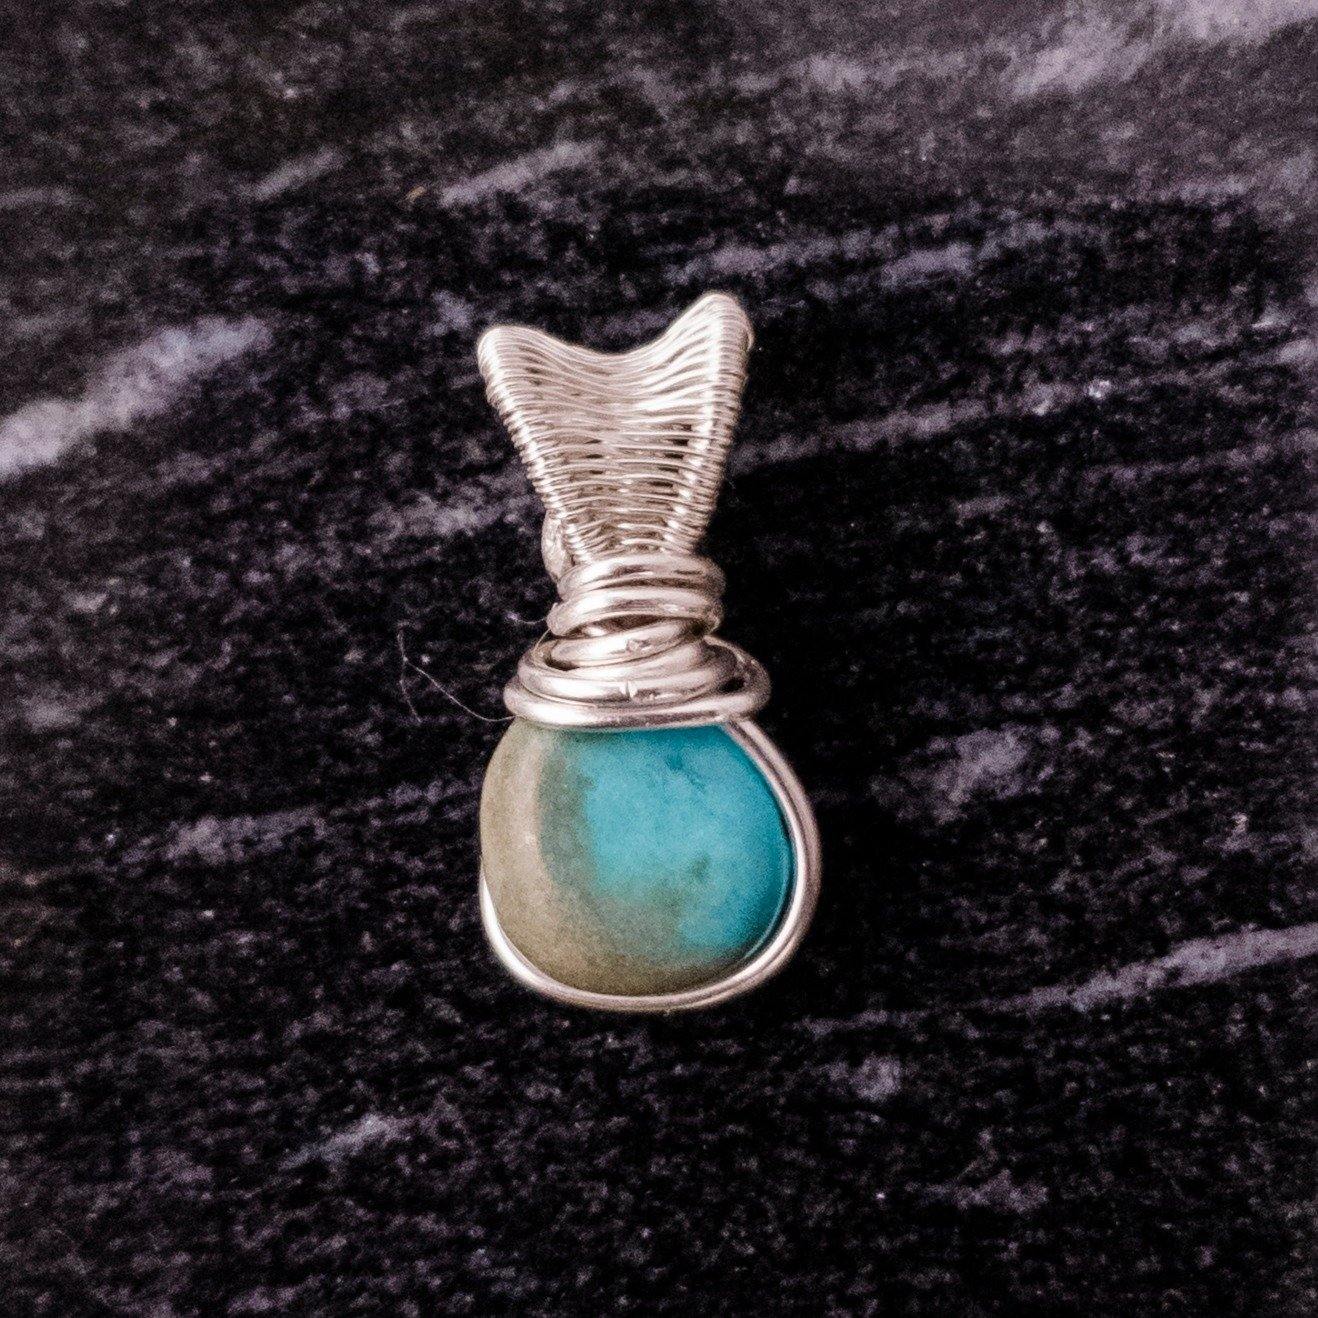 Real Turquoise Necklace Pendant in sterling silver front view - BellaChel Jeweler